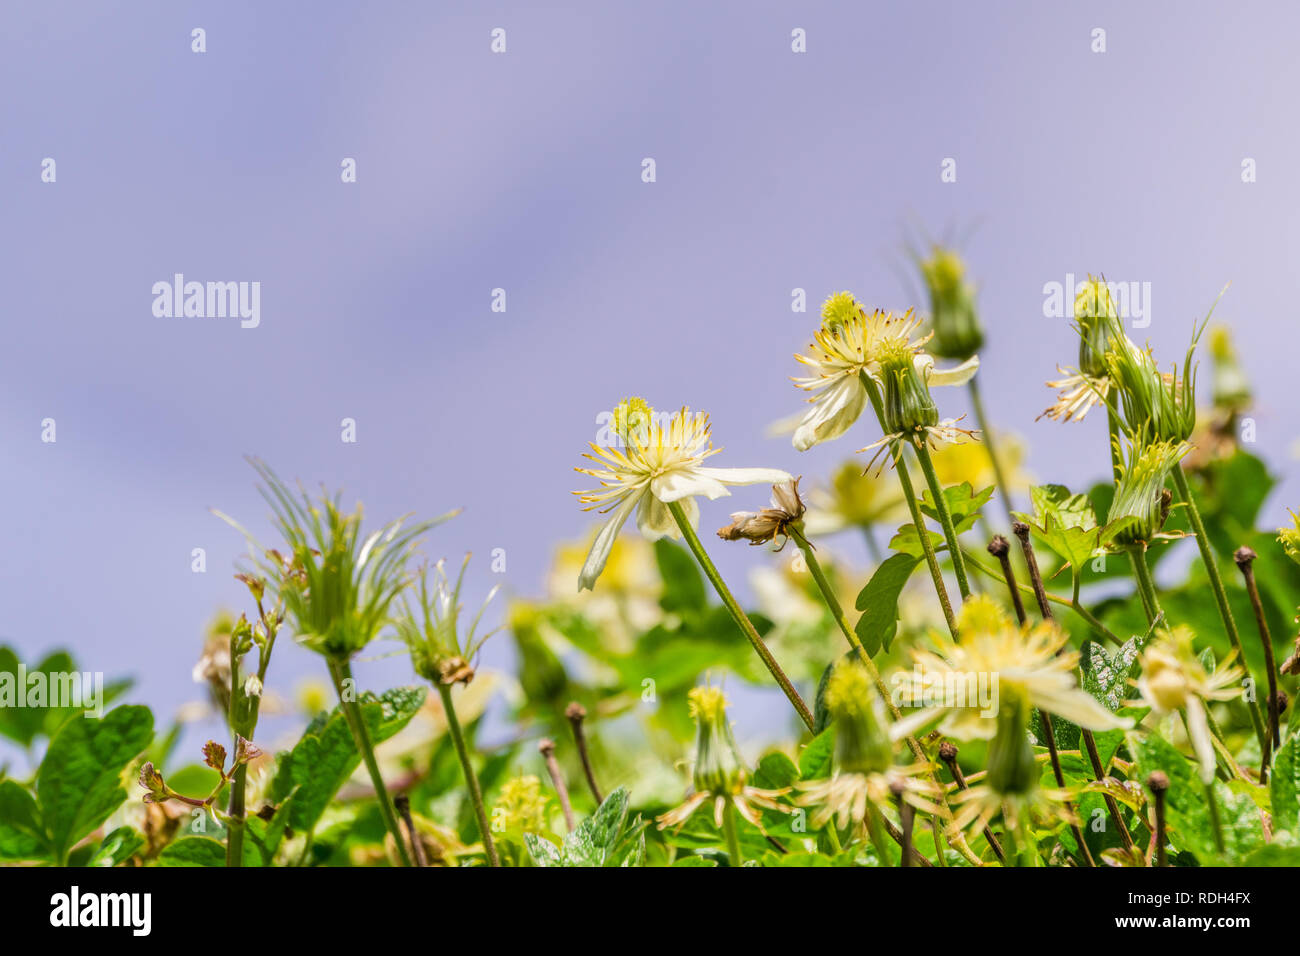 Clematis lasiantha (Pipestem Clematis) blooming in spring on a cloudy sky background, California Stock Photo